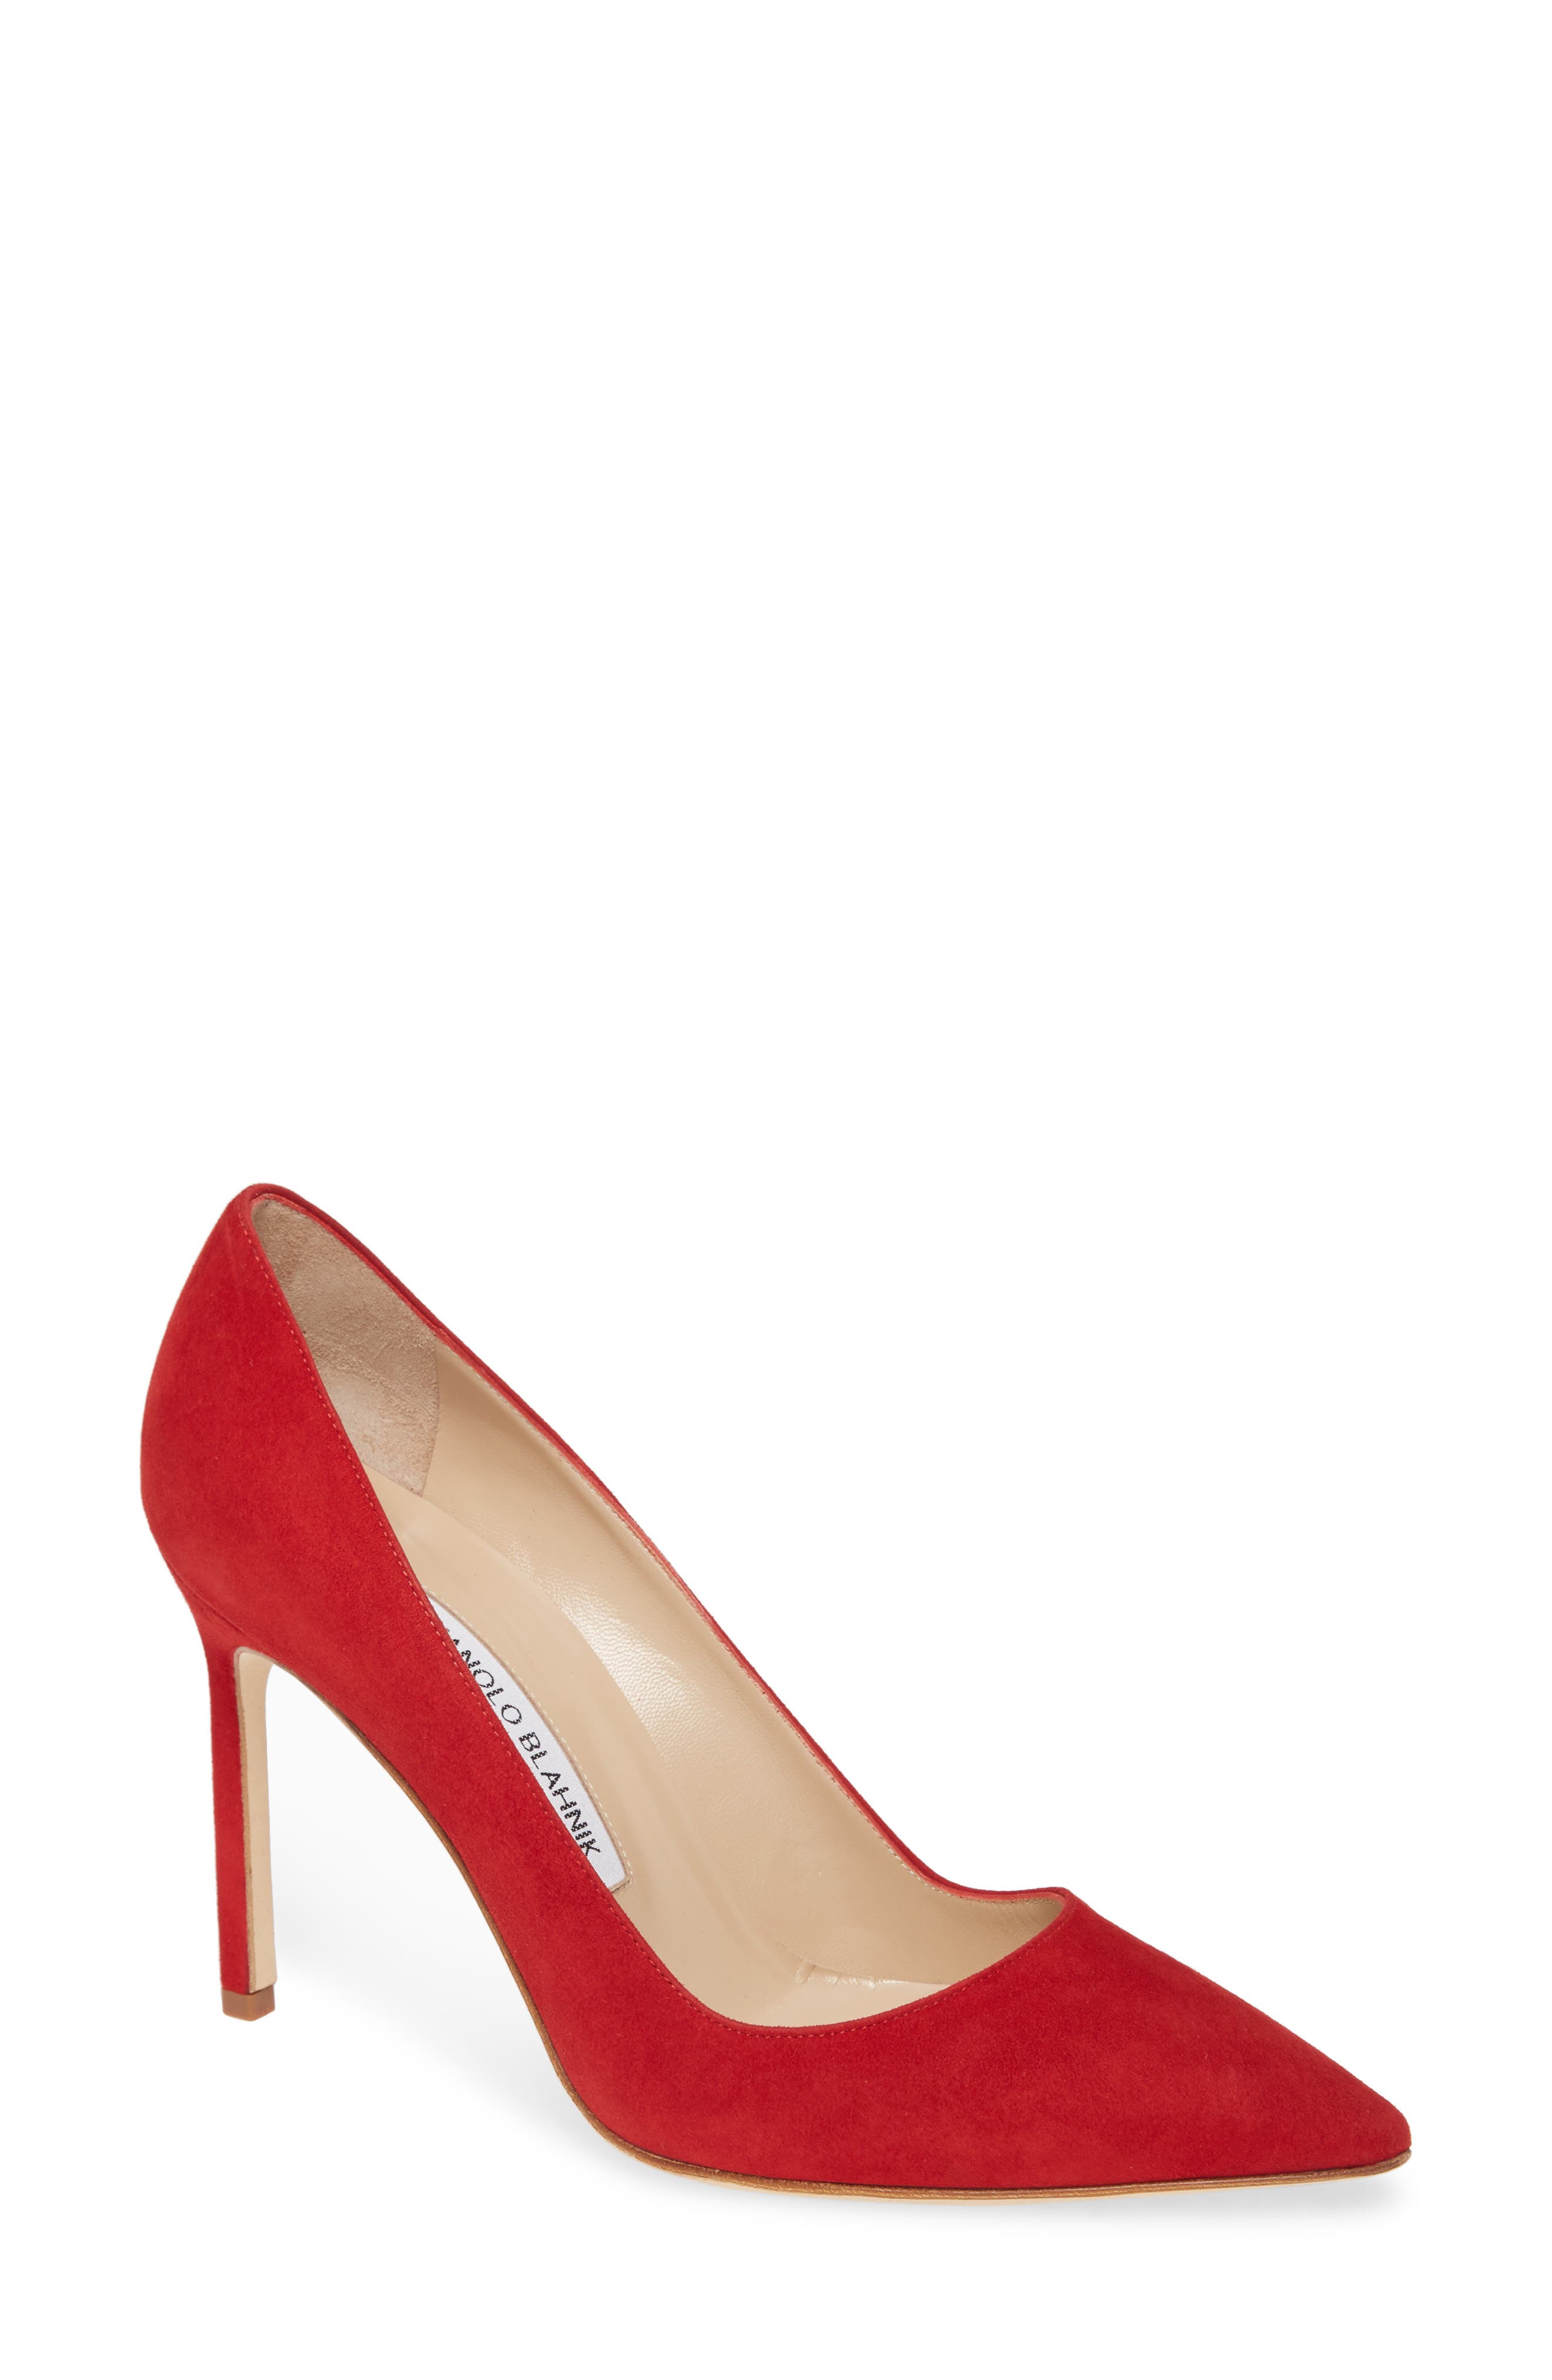 red pumps womens